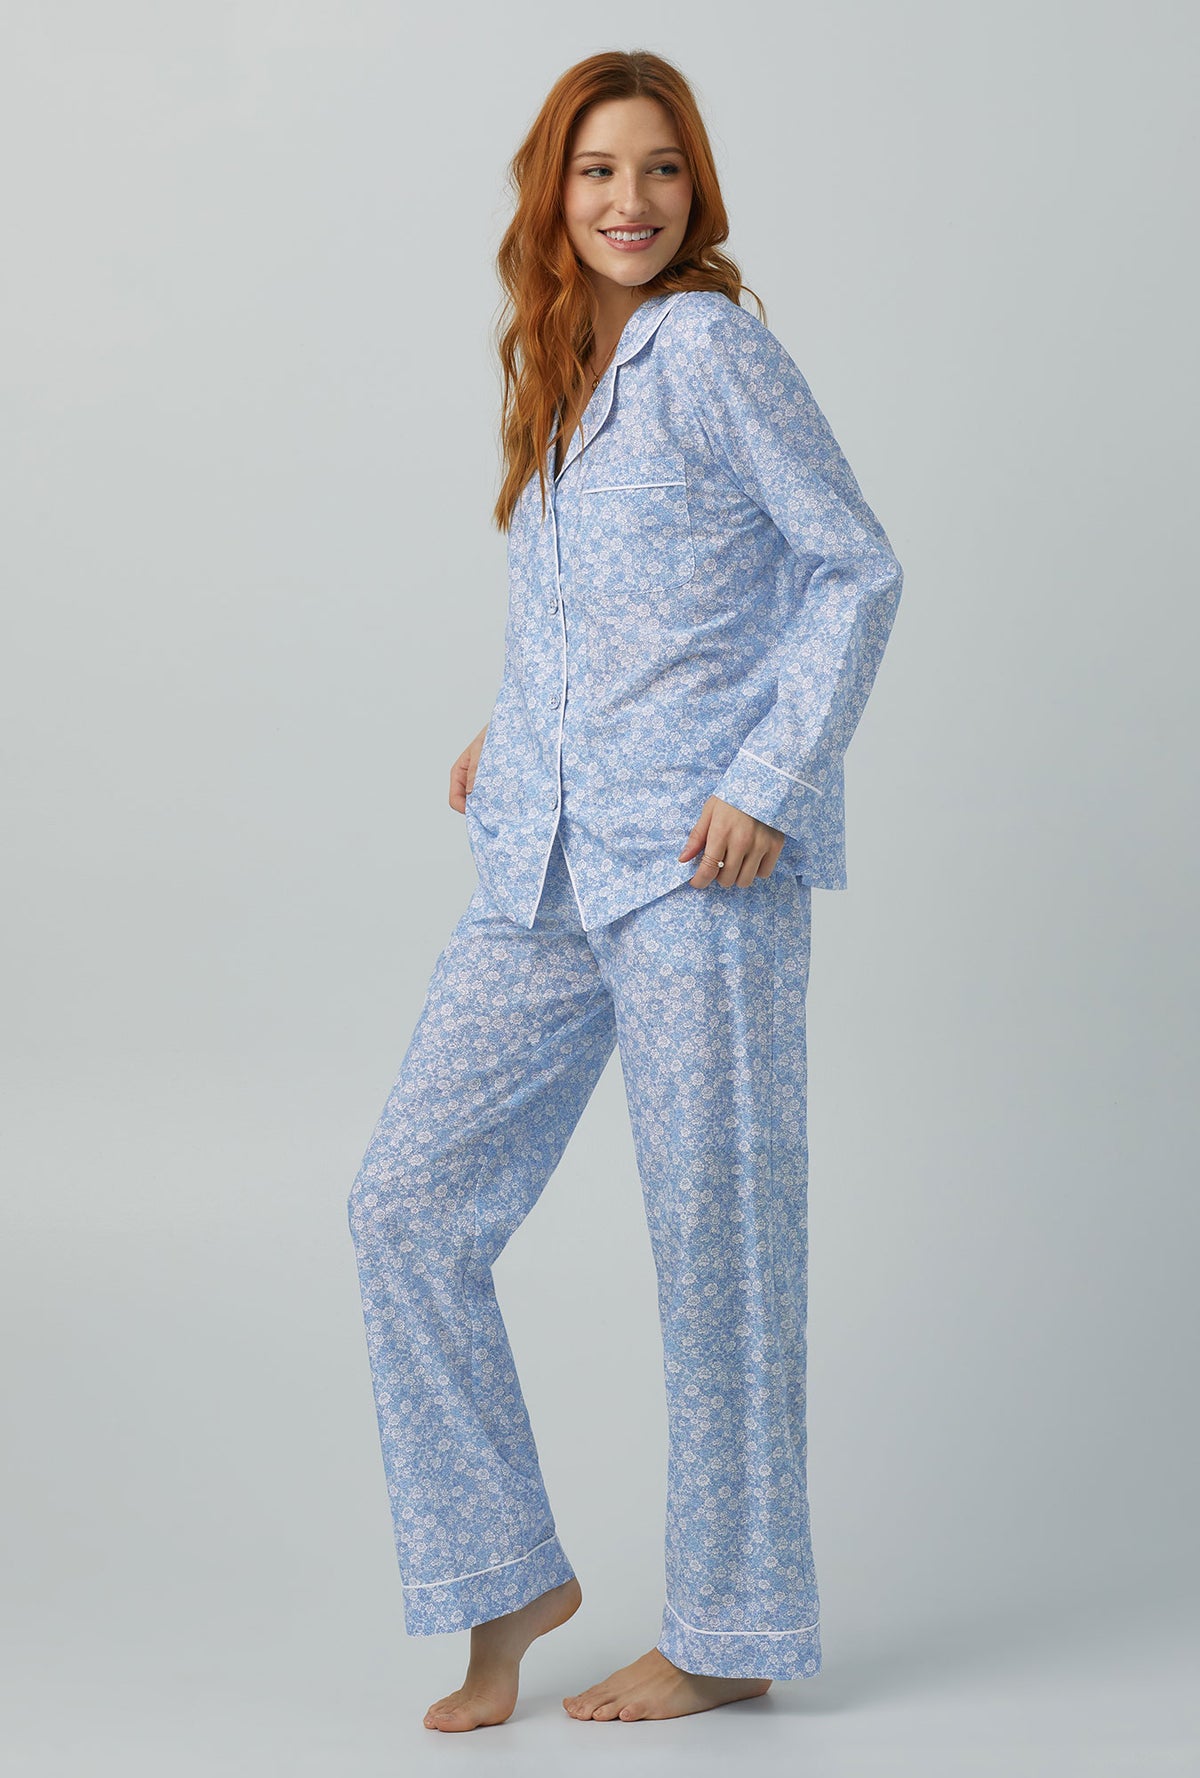 A lady wearing Long Sleeve Classic Woven Cotton Silk PJ Set with something blue print